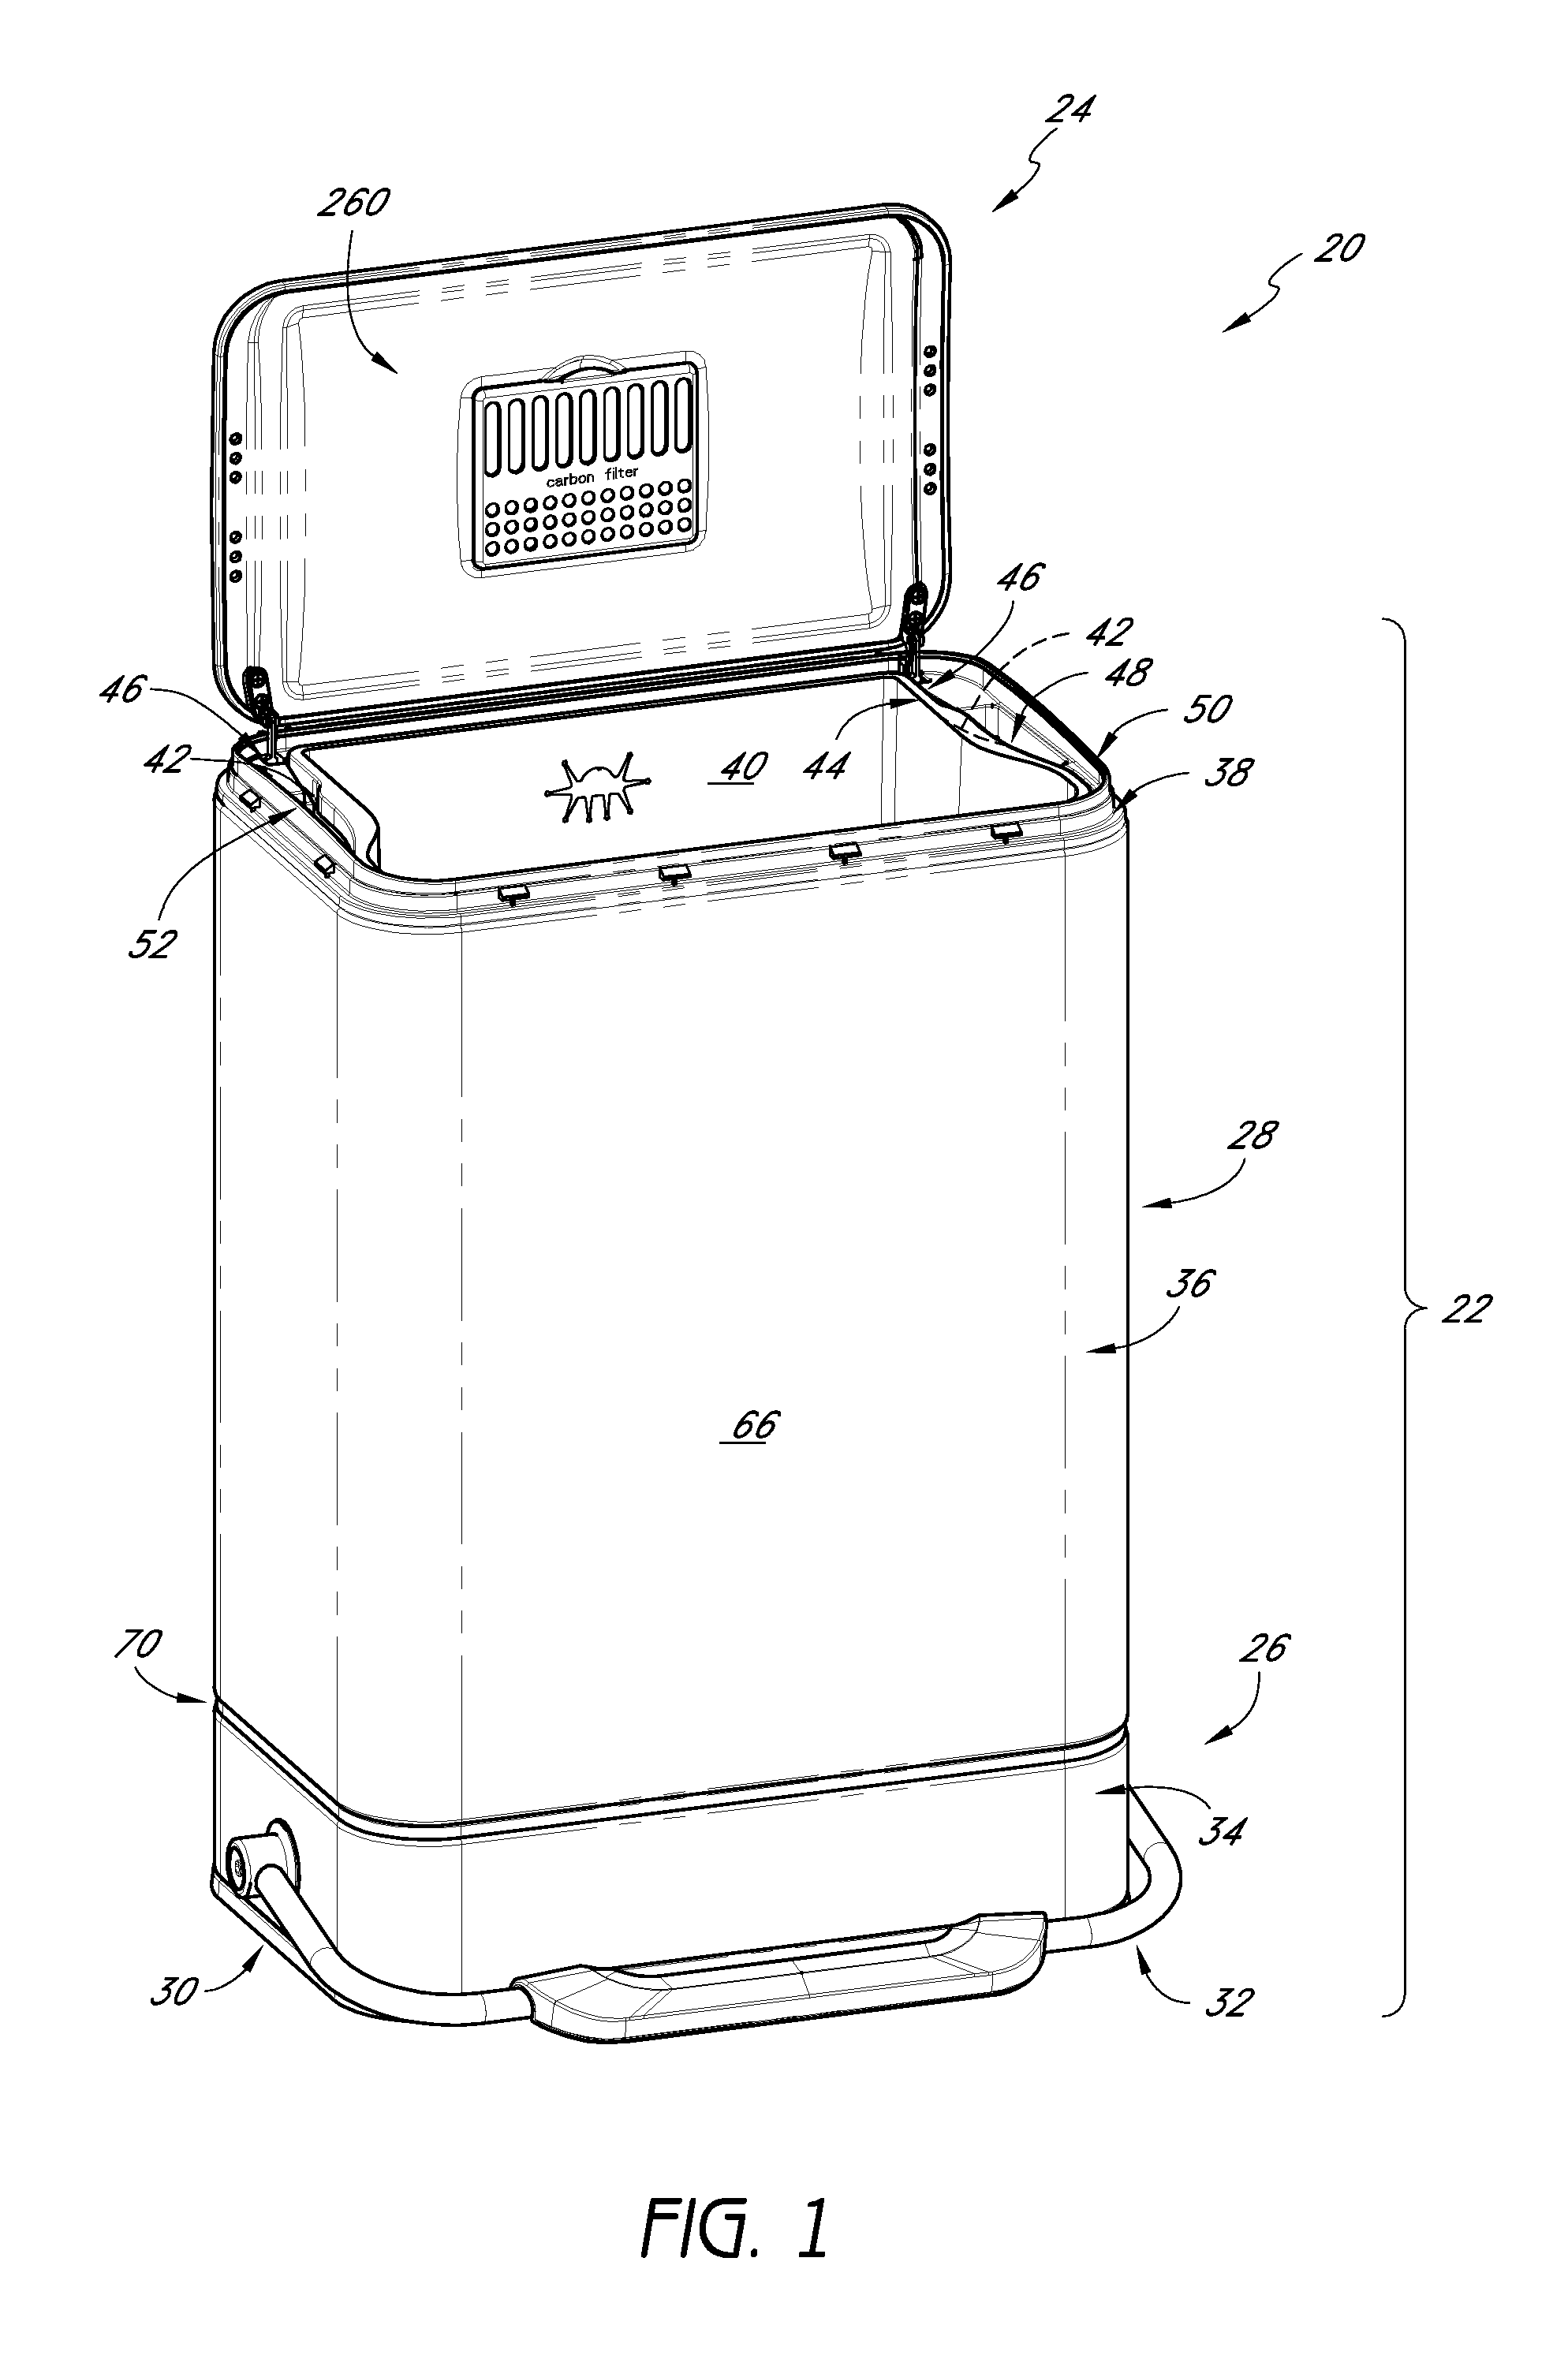 Receptacle with motion damper for lid, air filtration device, and Anti-sliding mechanism